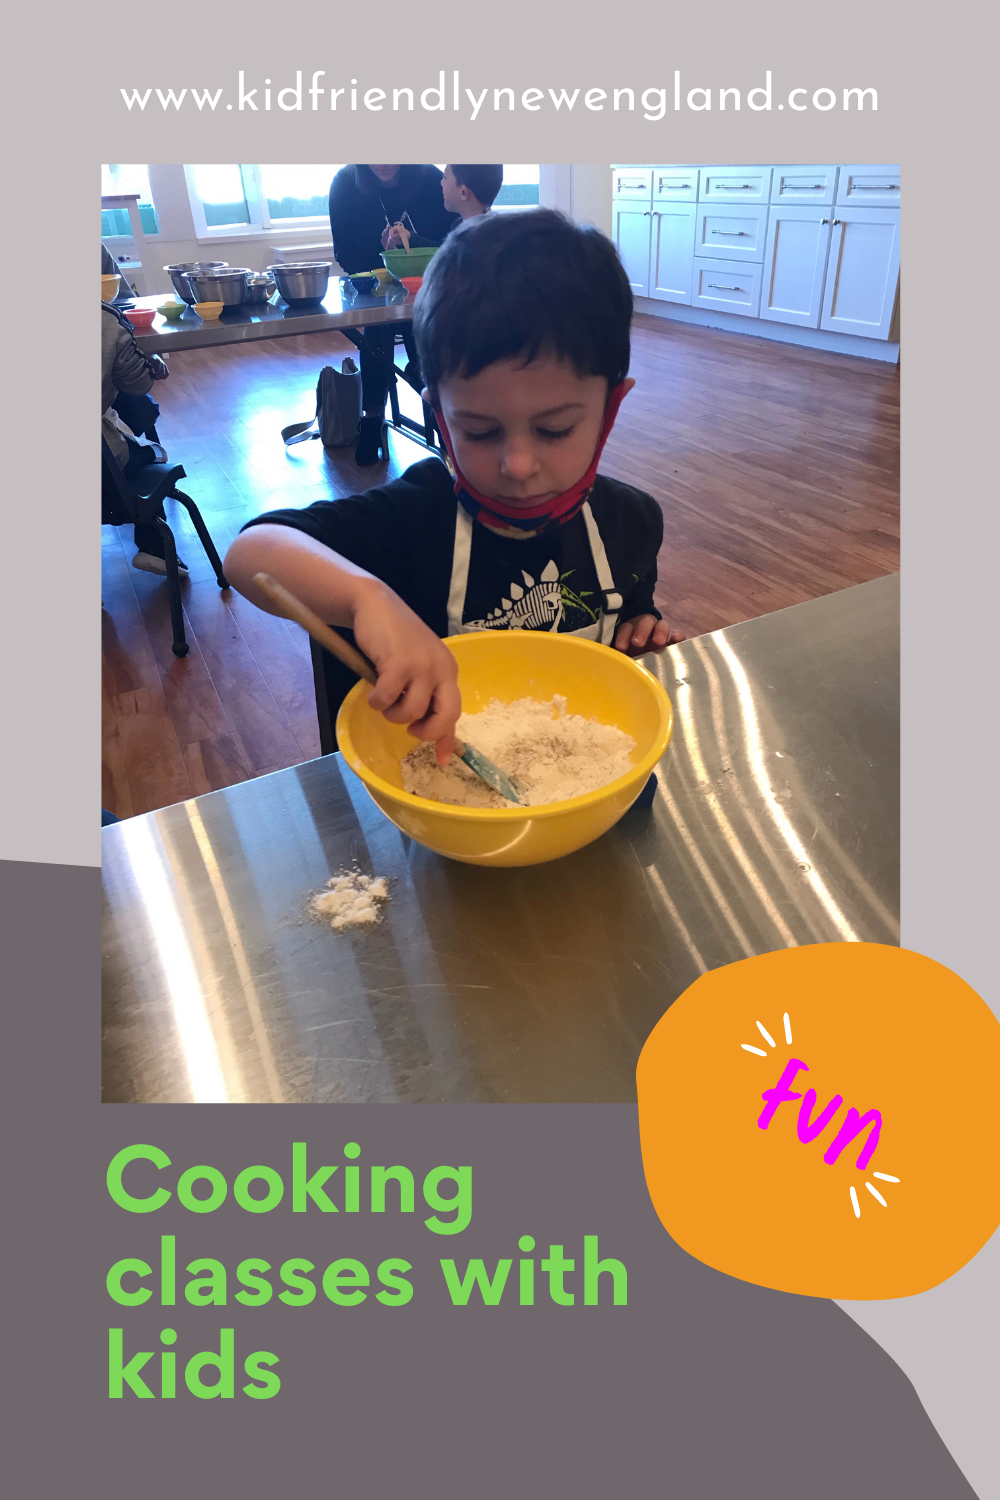 Cooking with kids class at Taste Buds in East Greenwich, Rhode Island